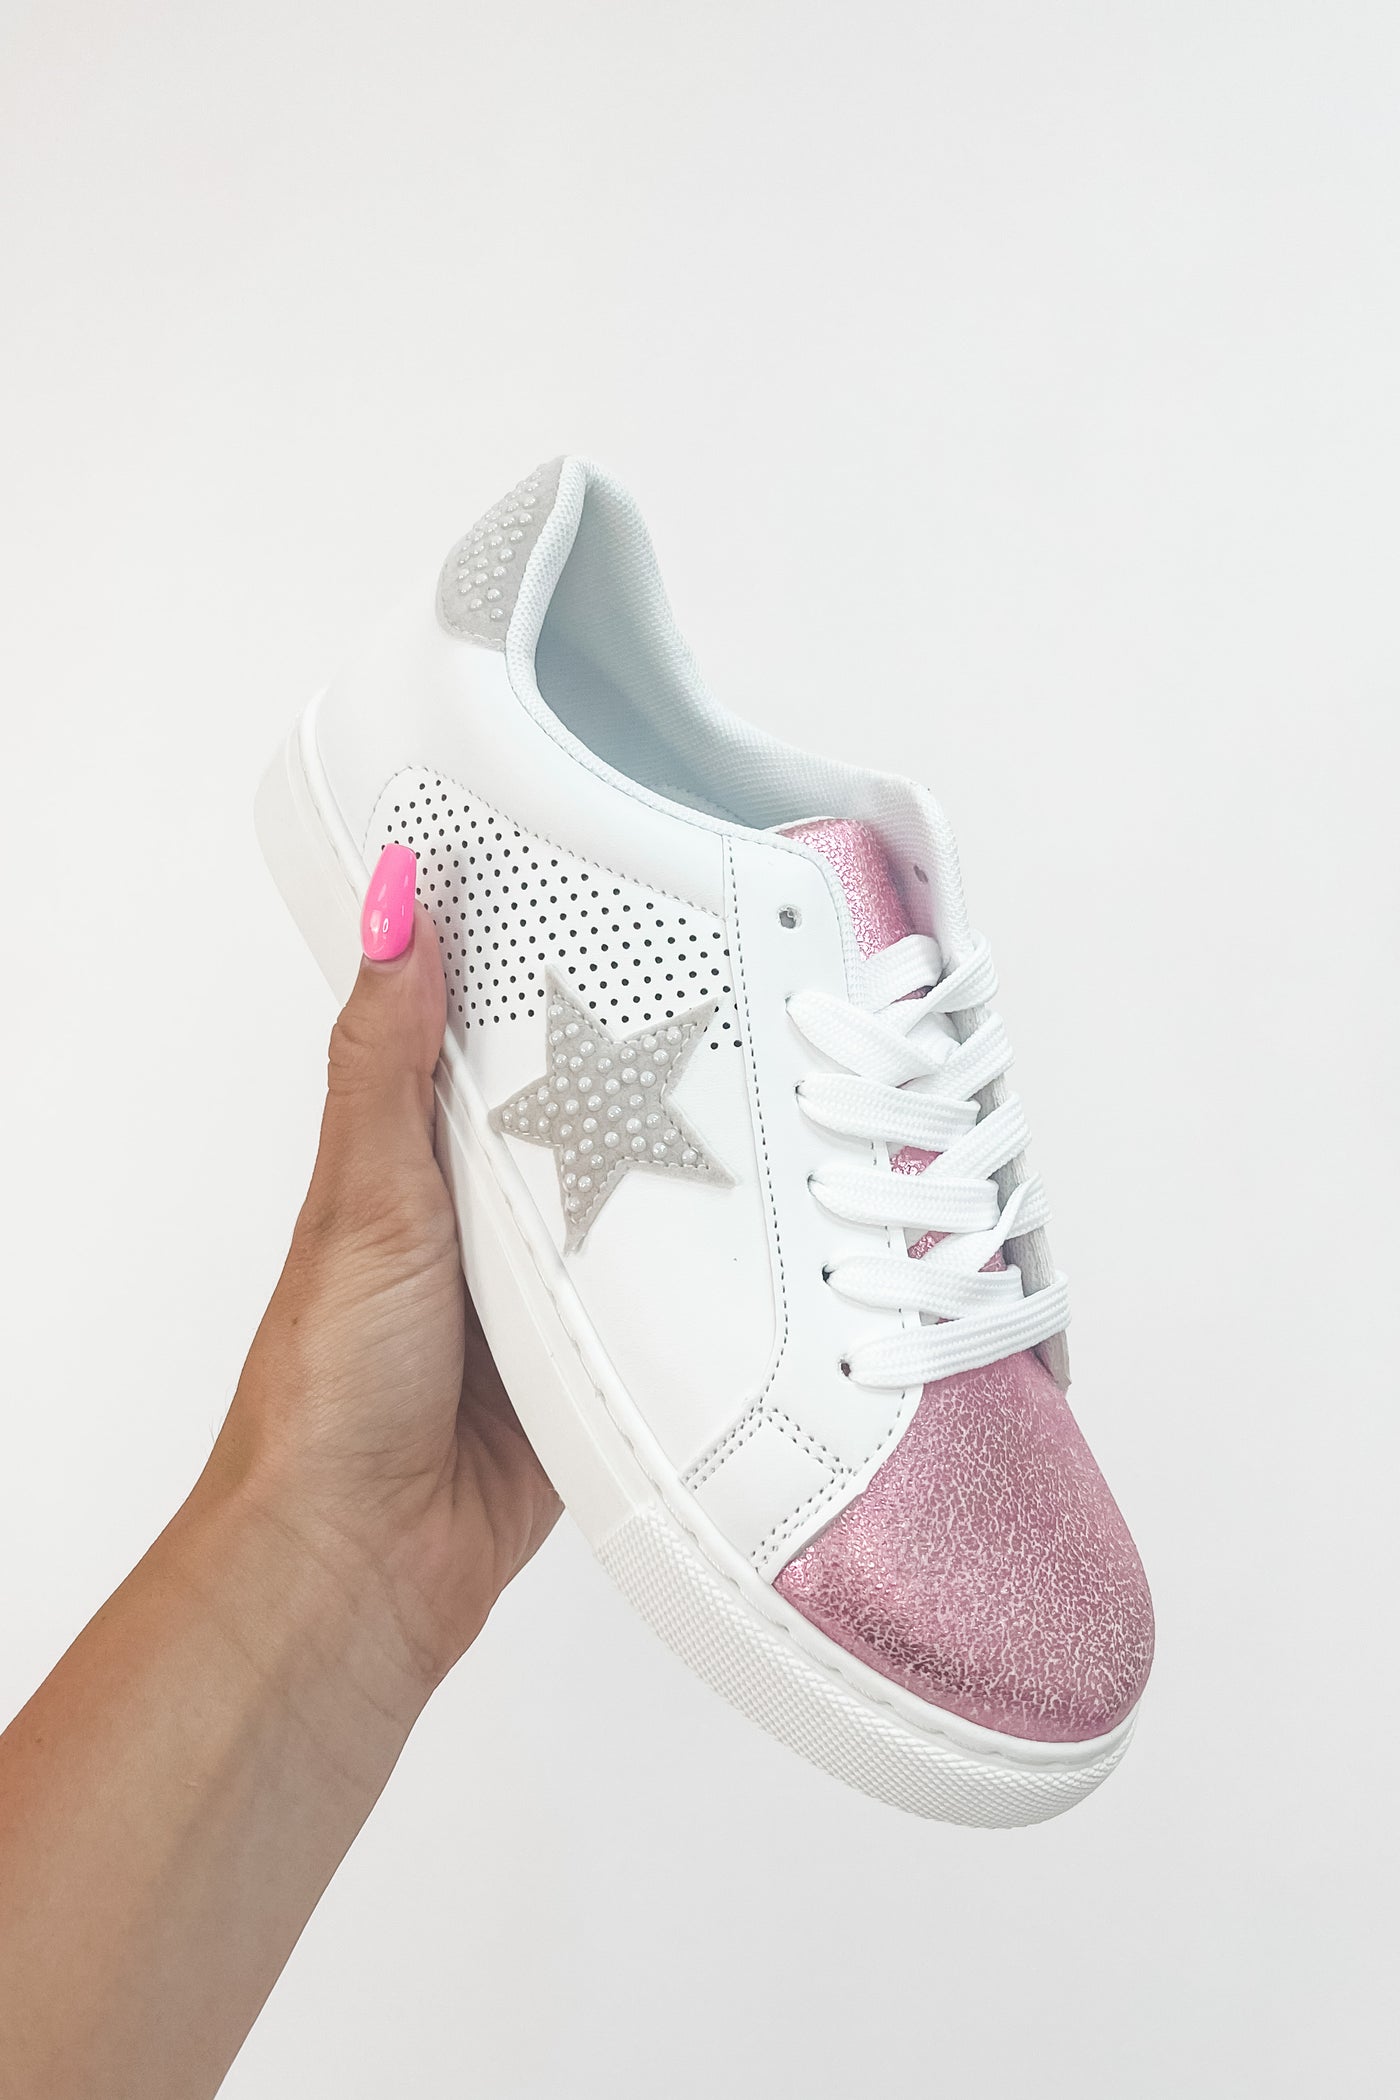 Chasing The Weekend Star Embellished Sneakers